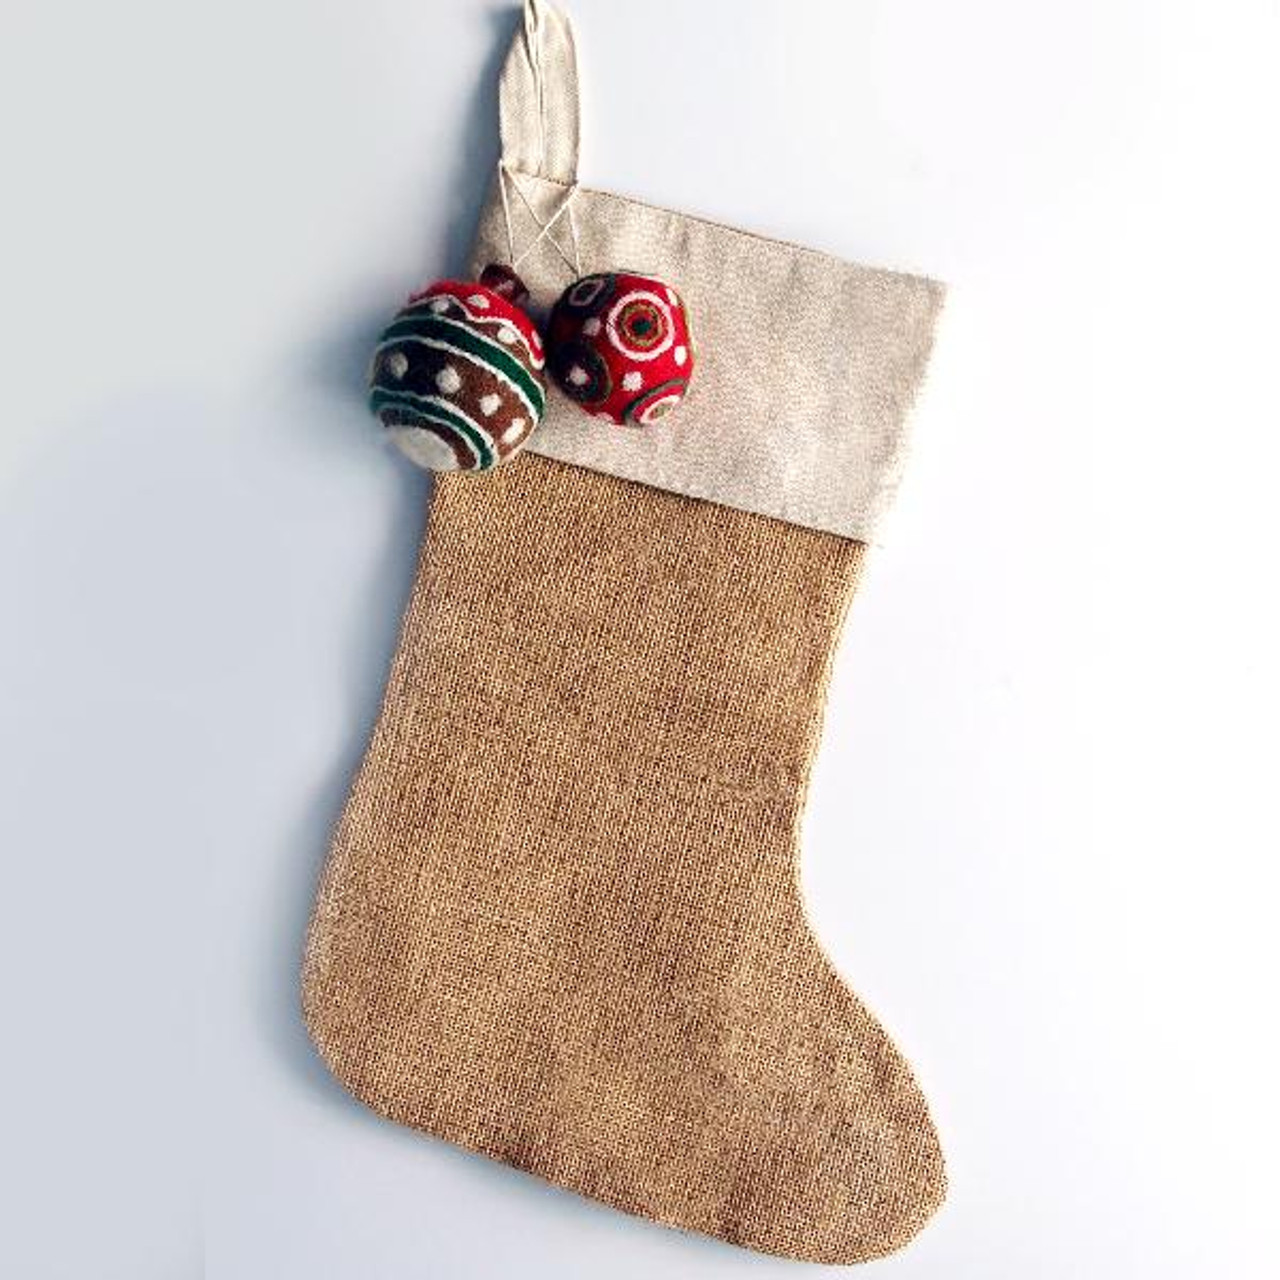  Burlap Christmas Stocking  with Canvas Cuff 17"